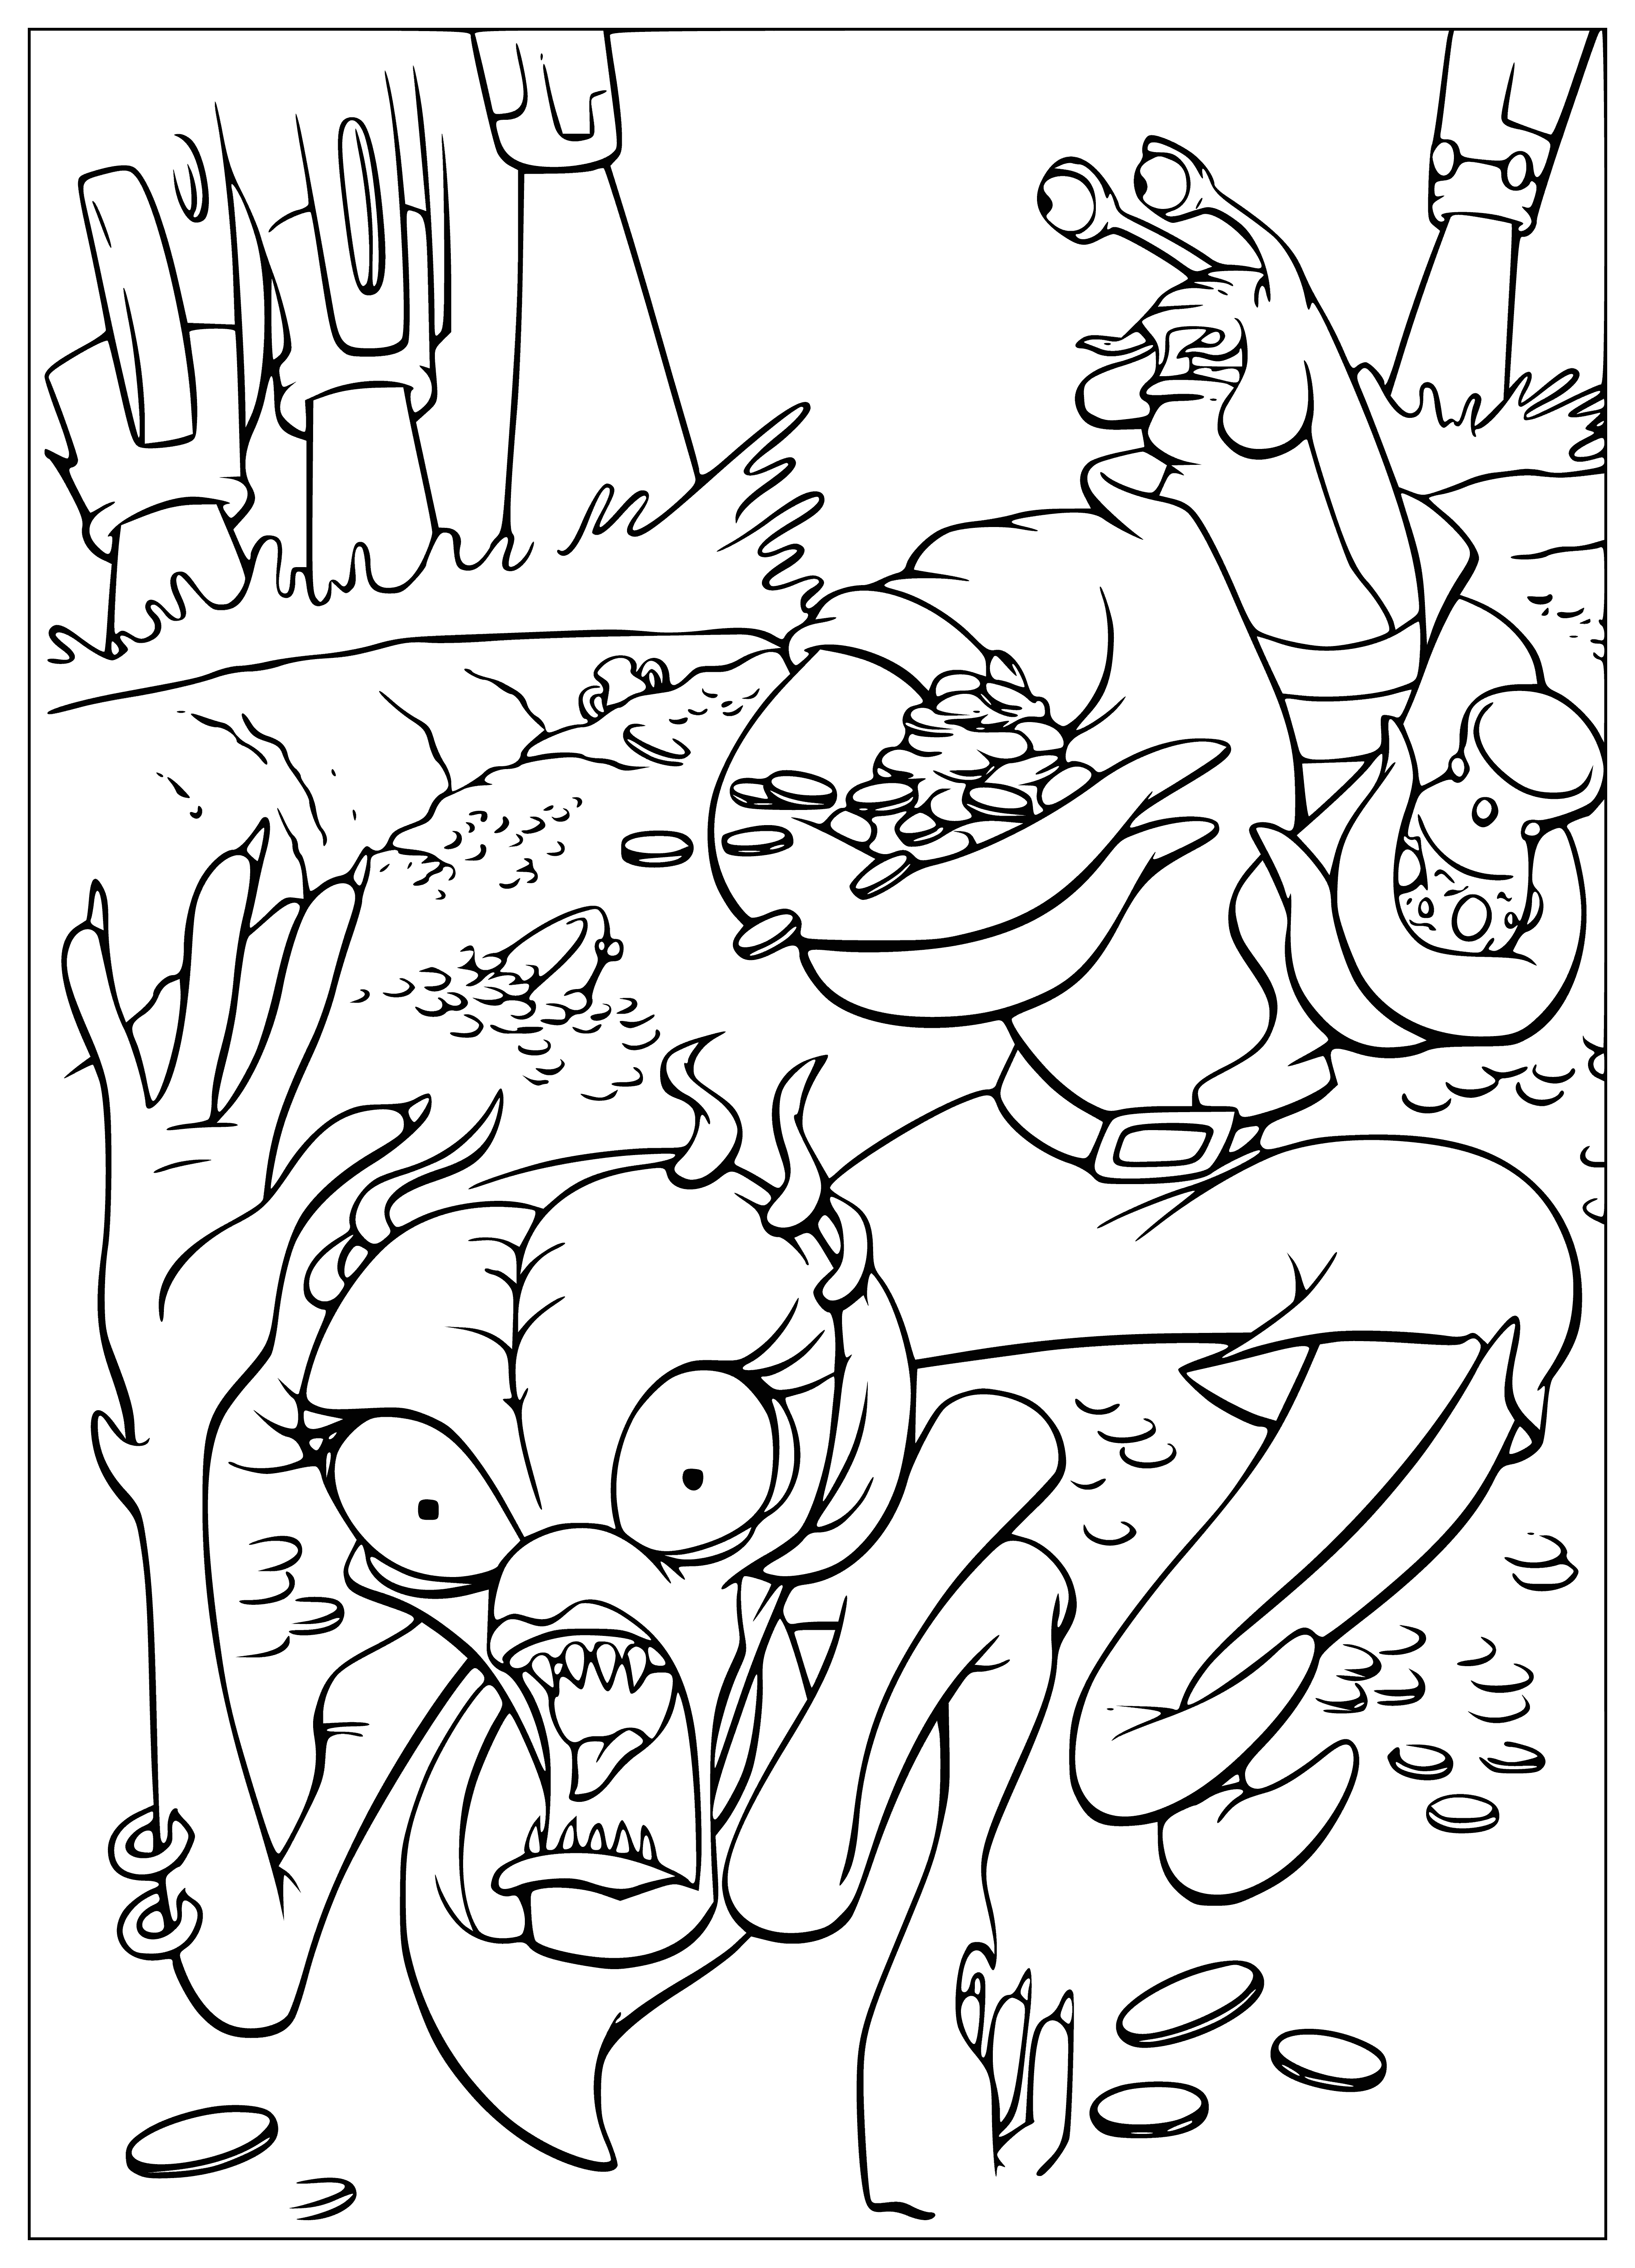 The planet is ready to explode coloring page